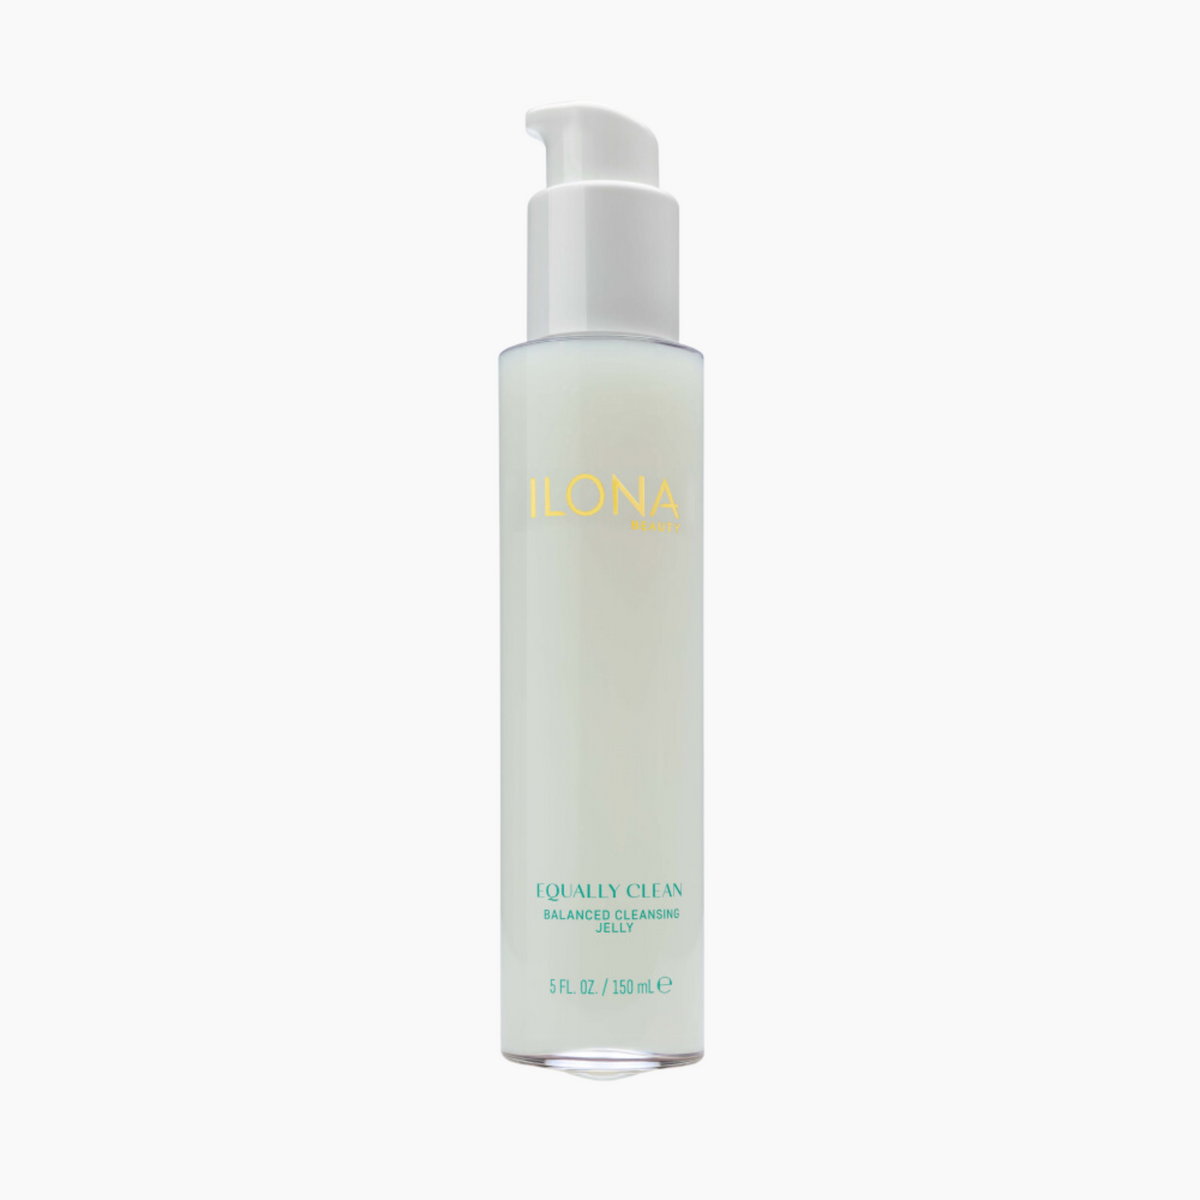 Equally Clean &amp; Absolute Clean Balanced Cleansing Jelly &amp; Hydrating Lotion Cleanser